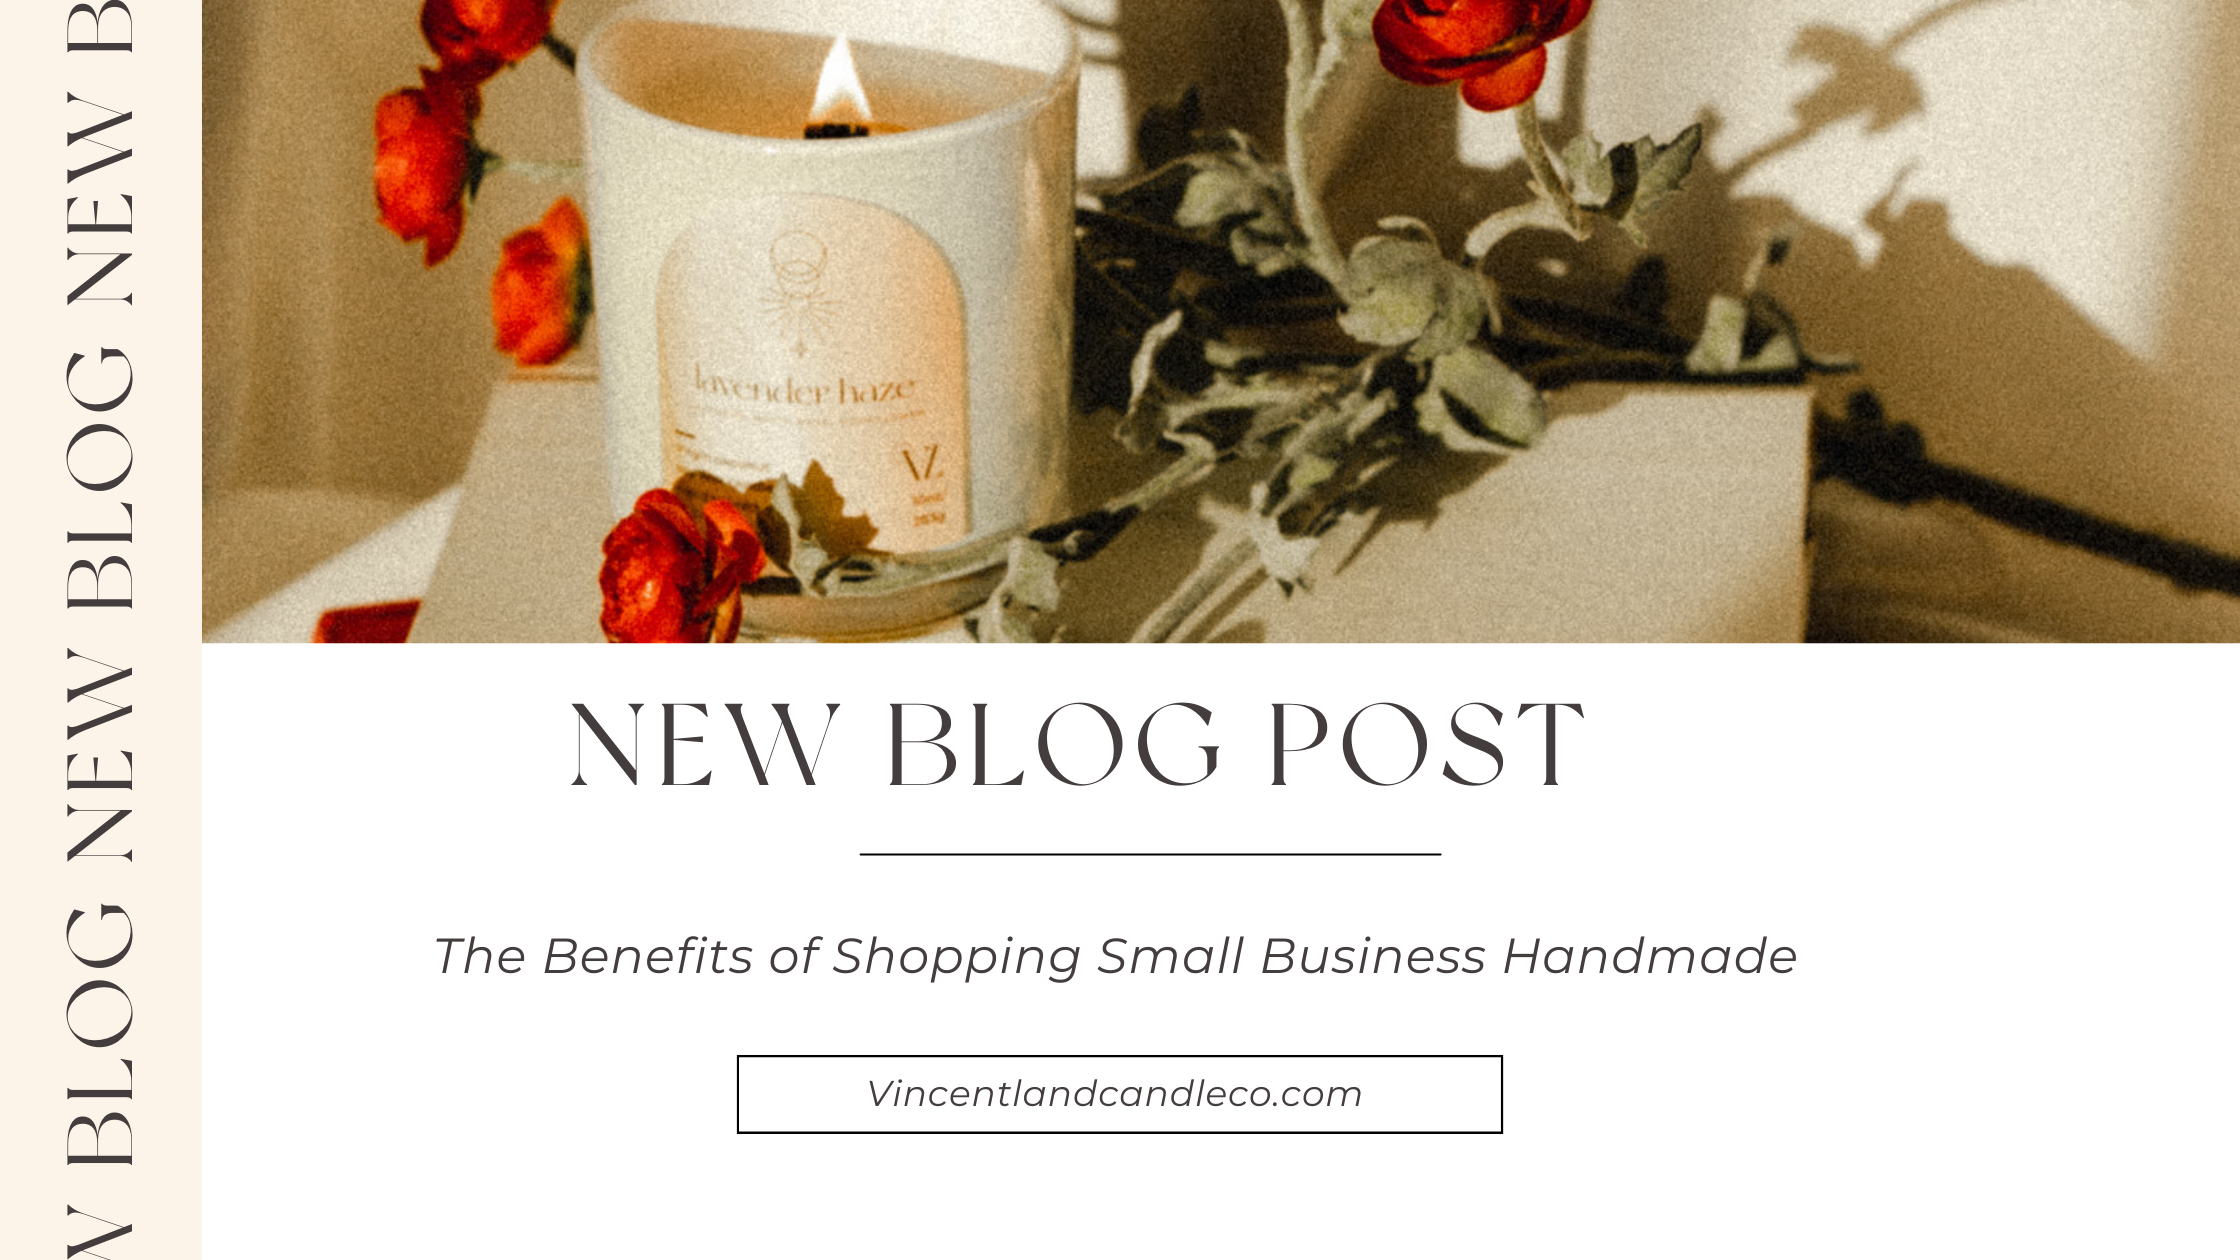 The Benefits of Shopping Small Business Handmade